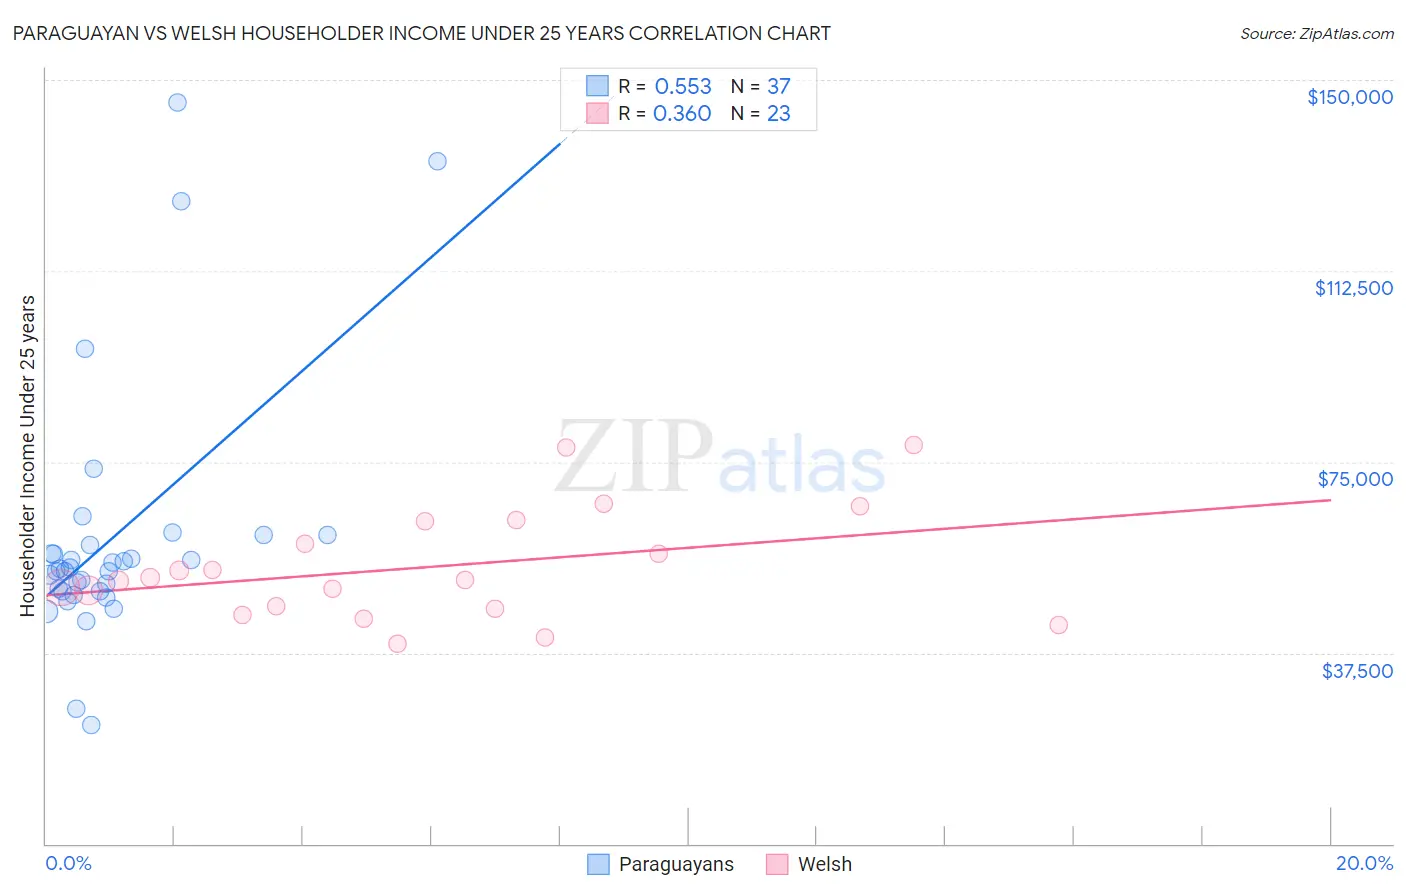 Paraguayan vs Welsh Householder Income Under 25 years